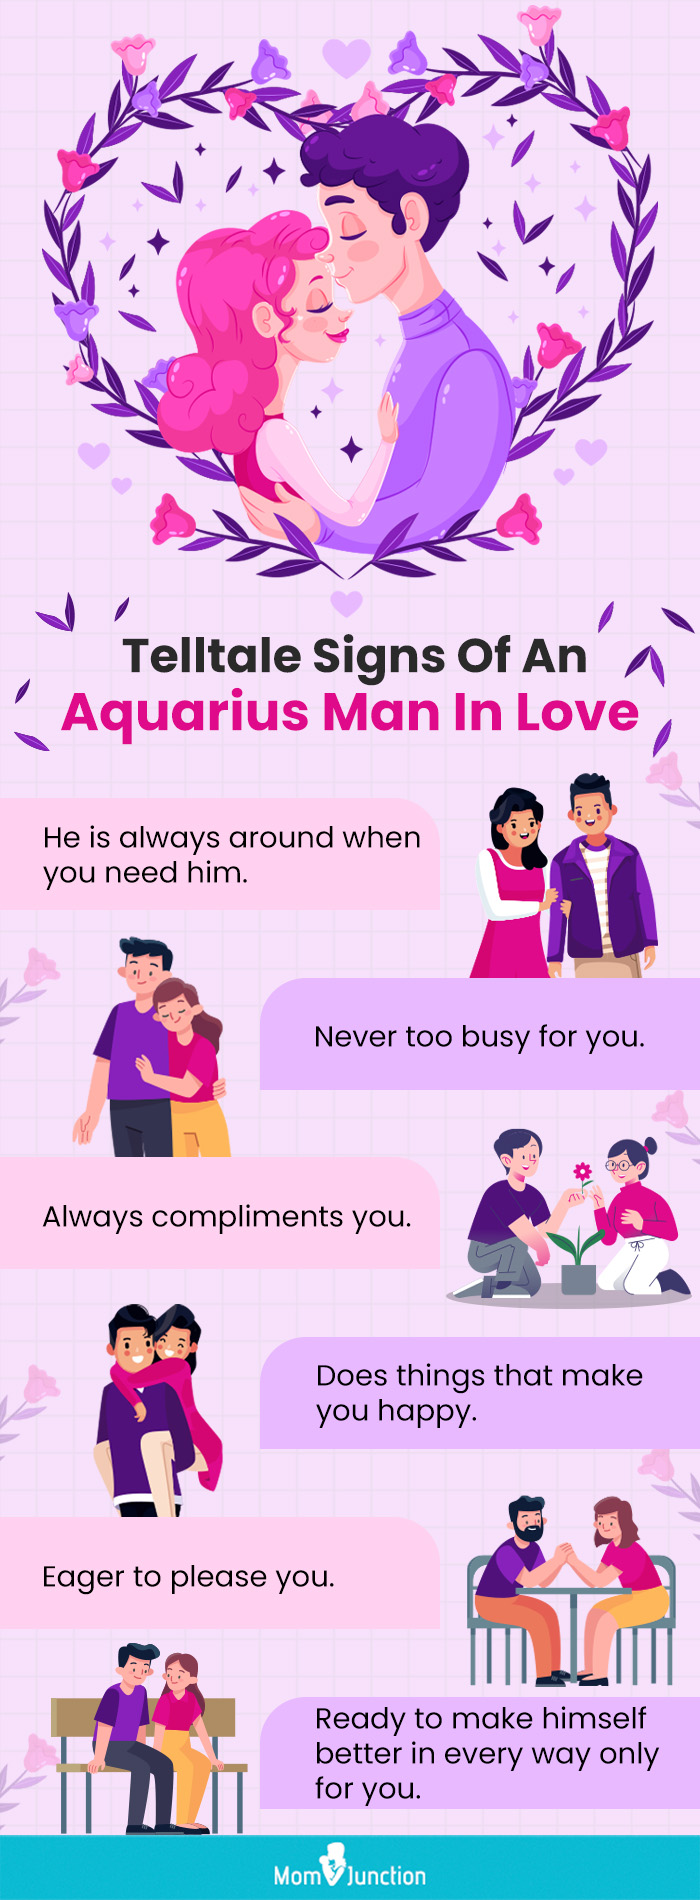 signs of an aquarius man in love (infographic)